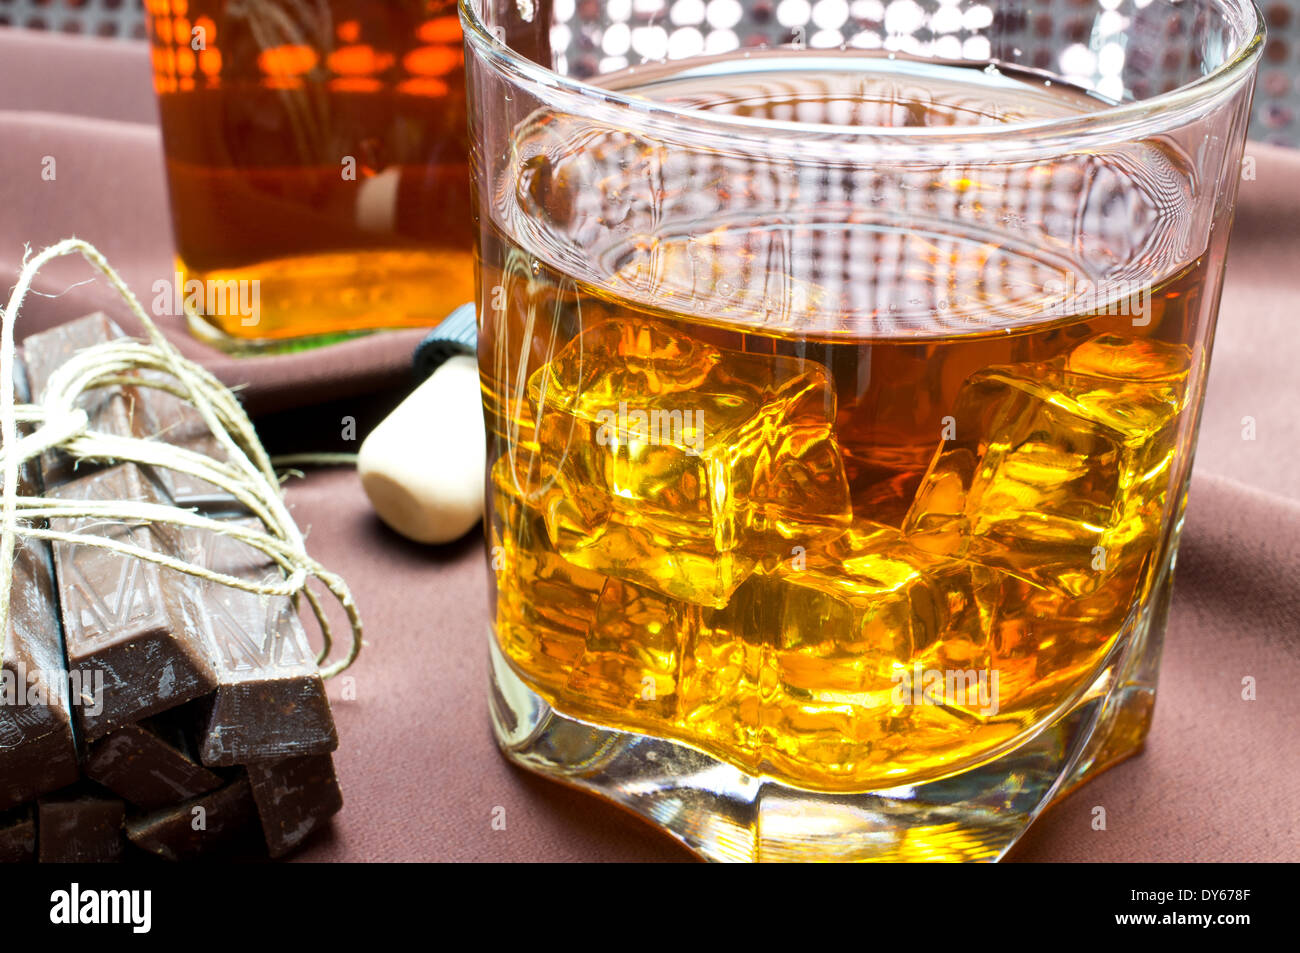 Whiskey in the glass, chocolates, a bottle, the cork Stock Photo